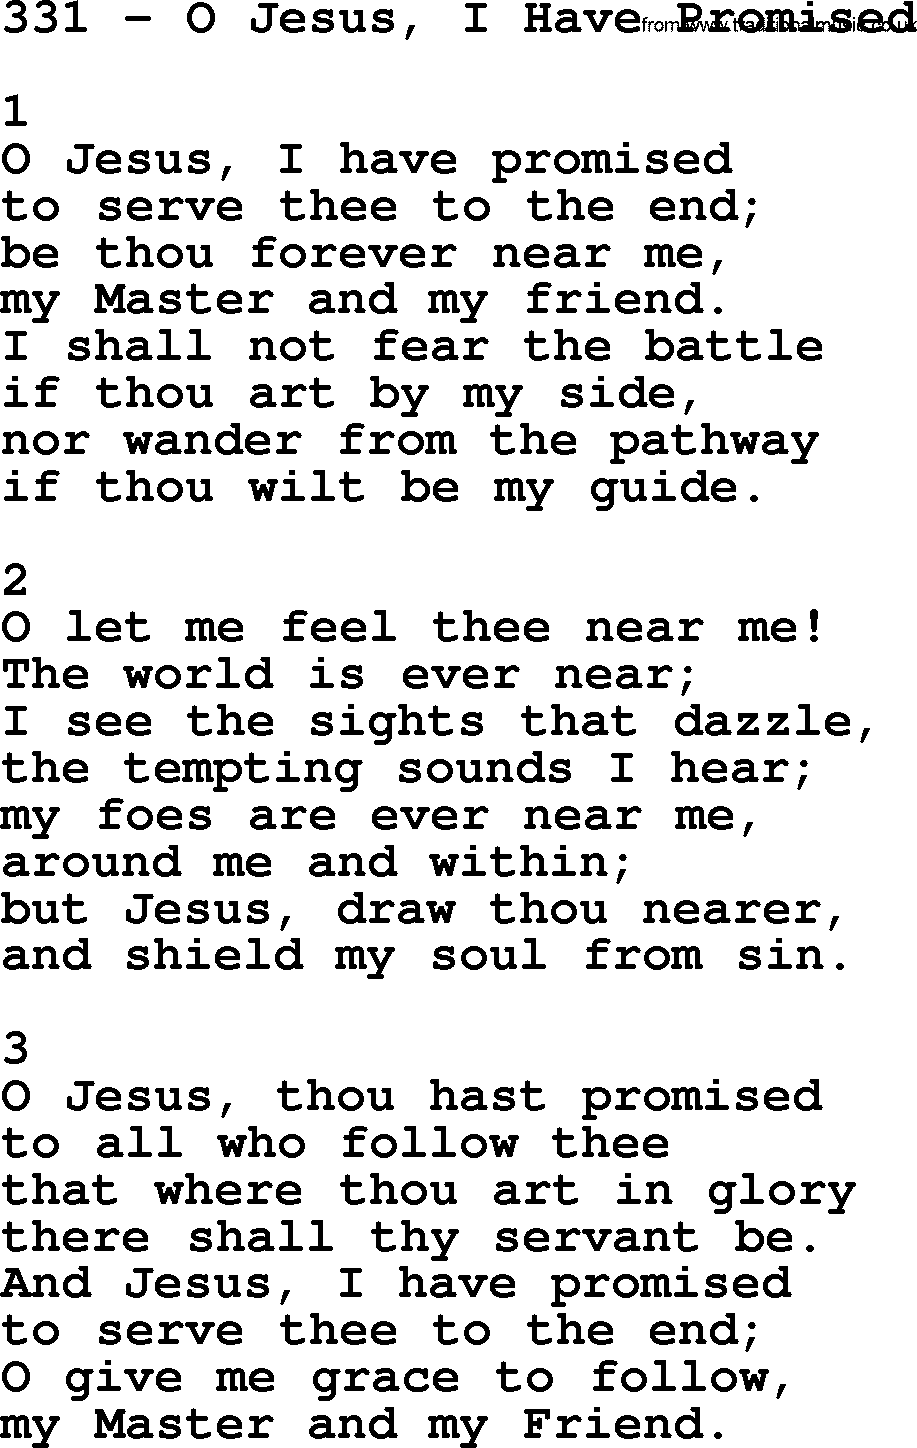 Complete Adventis Hymnal, title: 331-O Jesus, I Have Promised, with lyrics, midi, mp3, powerpoints(PPT) and PDF,